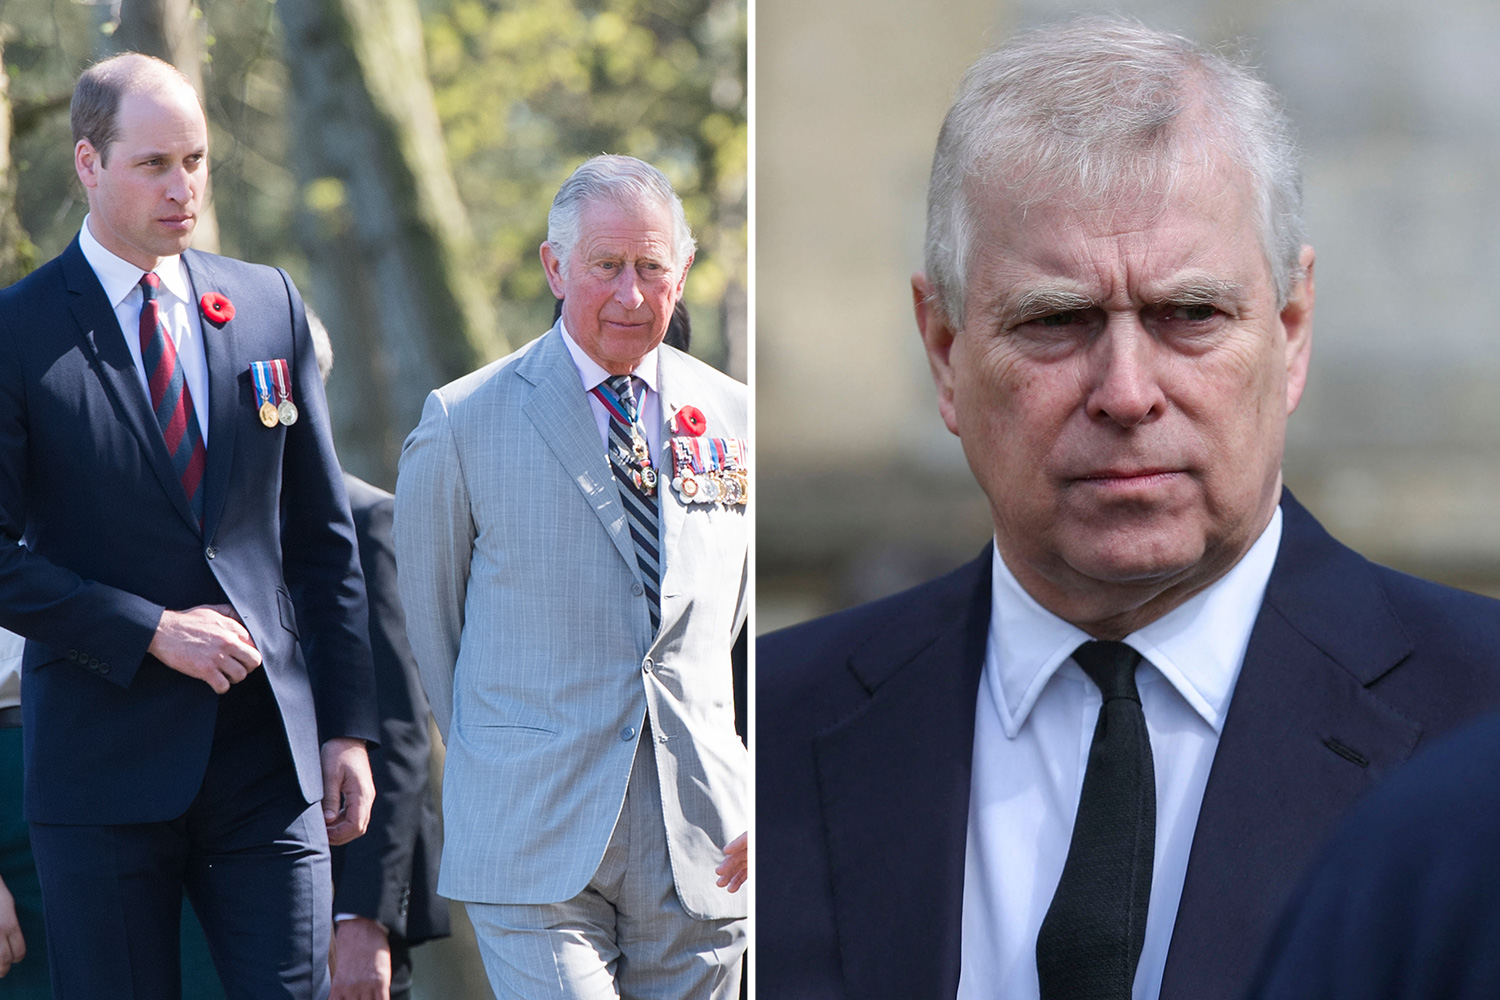 Wills & Charles 'furious' with Andy over huge legal bills as 'Queen cuts him off'